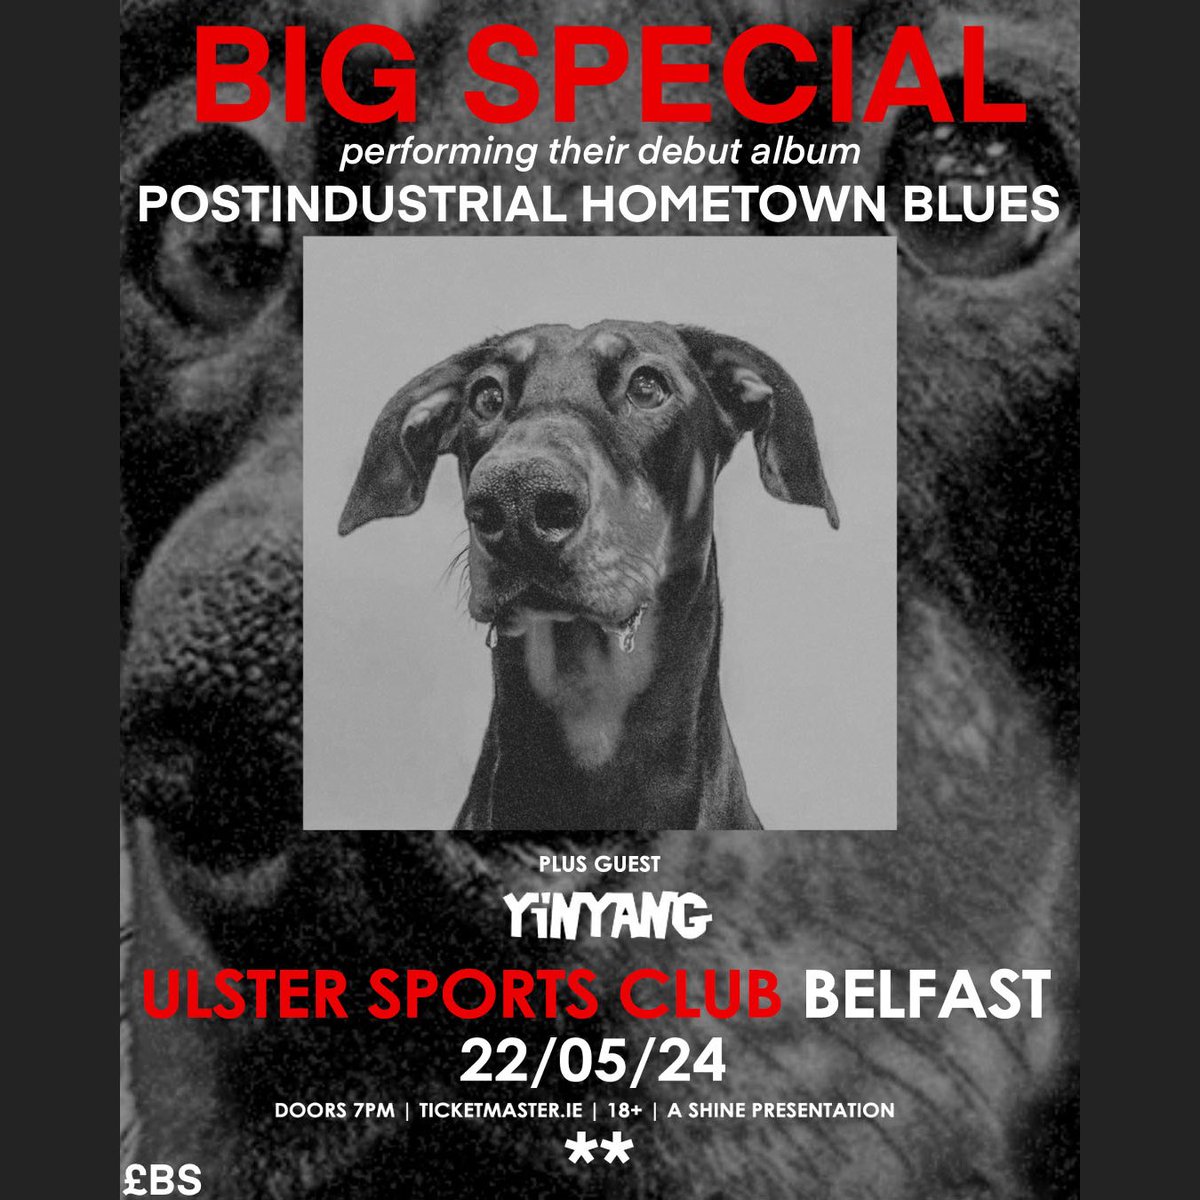 𝗦𝗛𝗢𝗪 𝗨𝗣𝗗𝗔𝗧𝗘 📣 @helloitsyinyang has been added to the bill for @BIGSPECIAL_ at Ulster Sports Club on 22nd May! Remaining tix 👉🏼bit.ly/BigSUSC